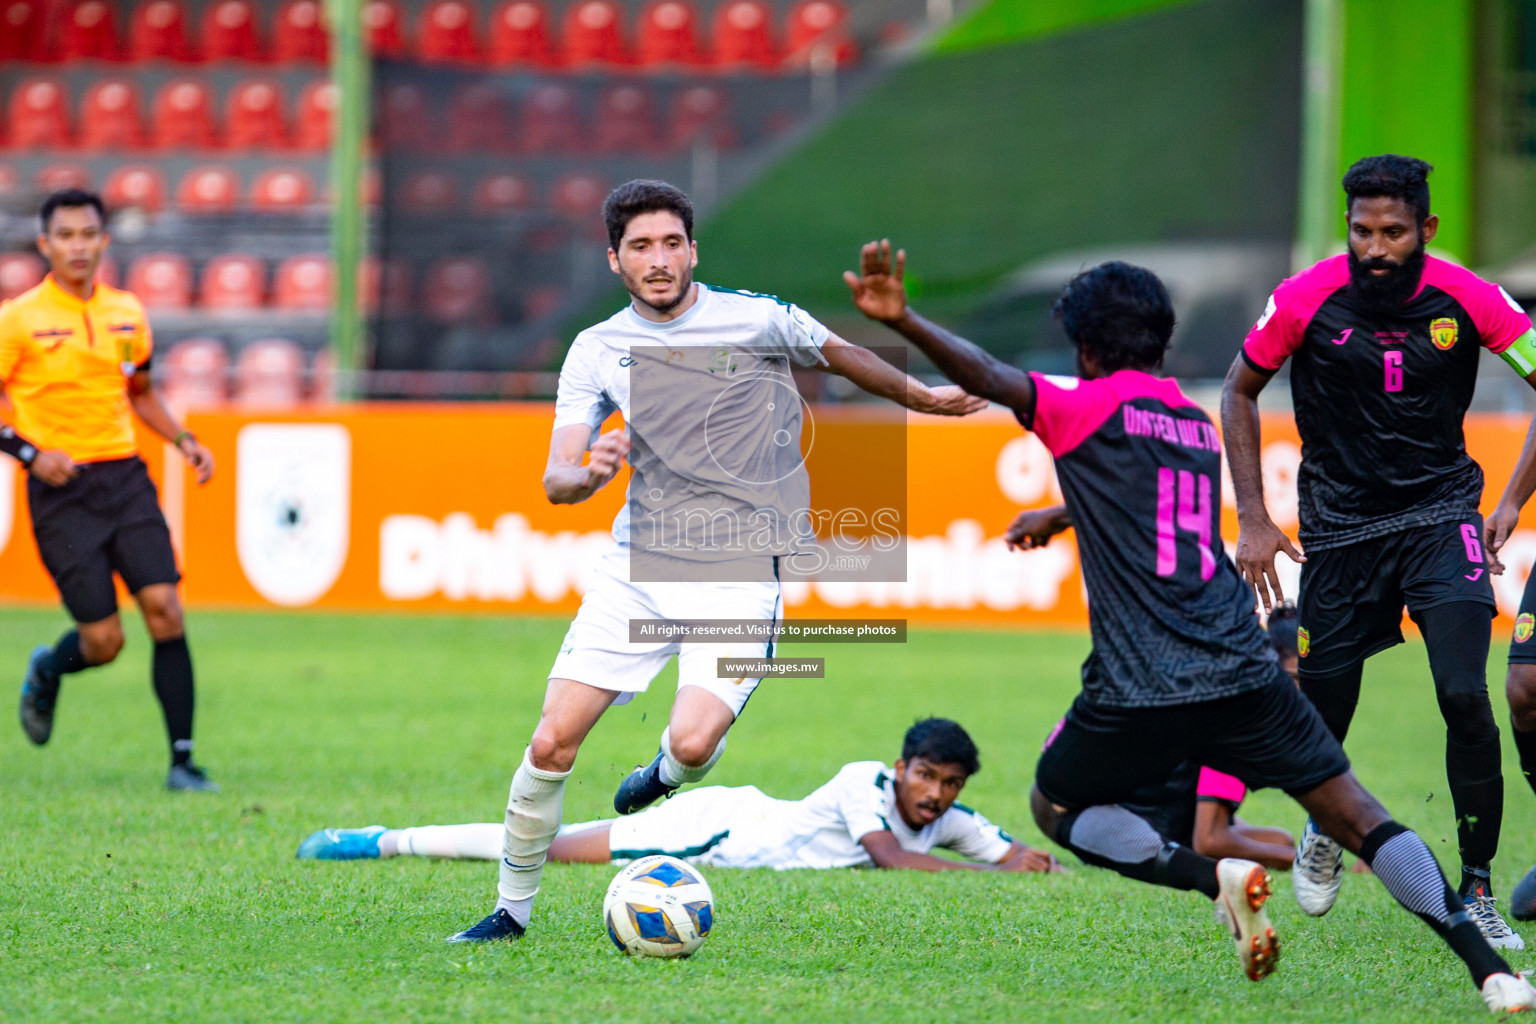 Green Streets vs United Victory in Dhiraagu Dhivehi Premier League 2020-21 on 26 December 2020 held in Male', Maldives